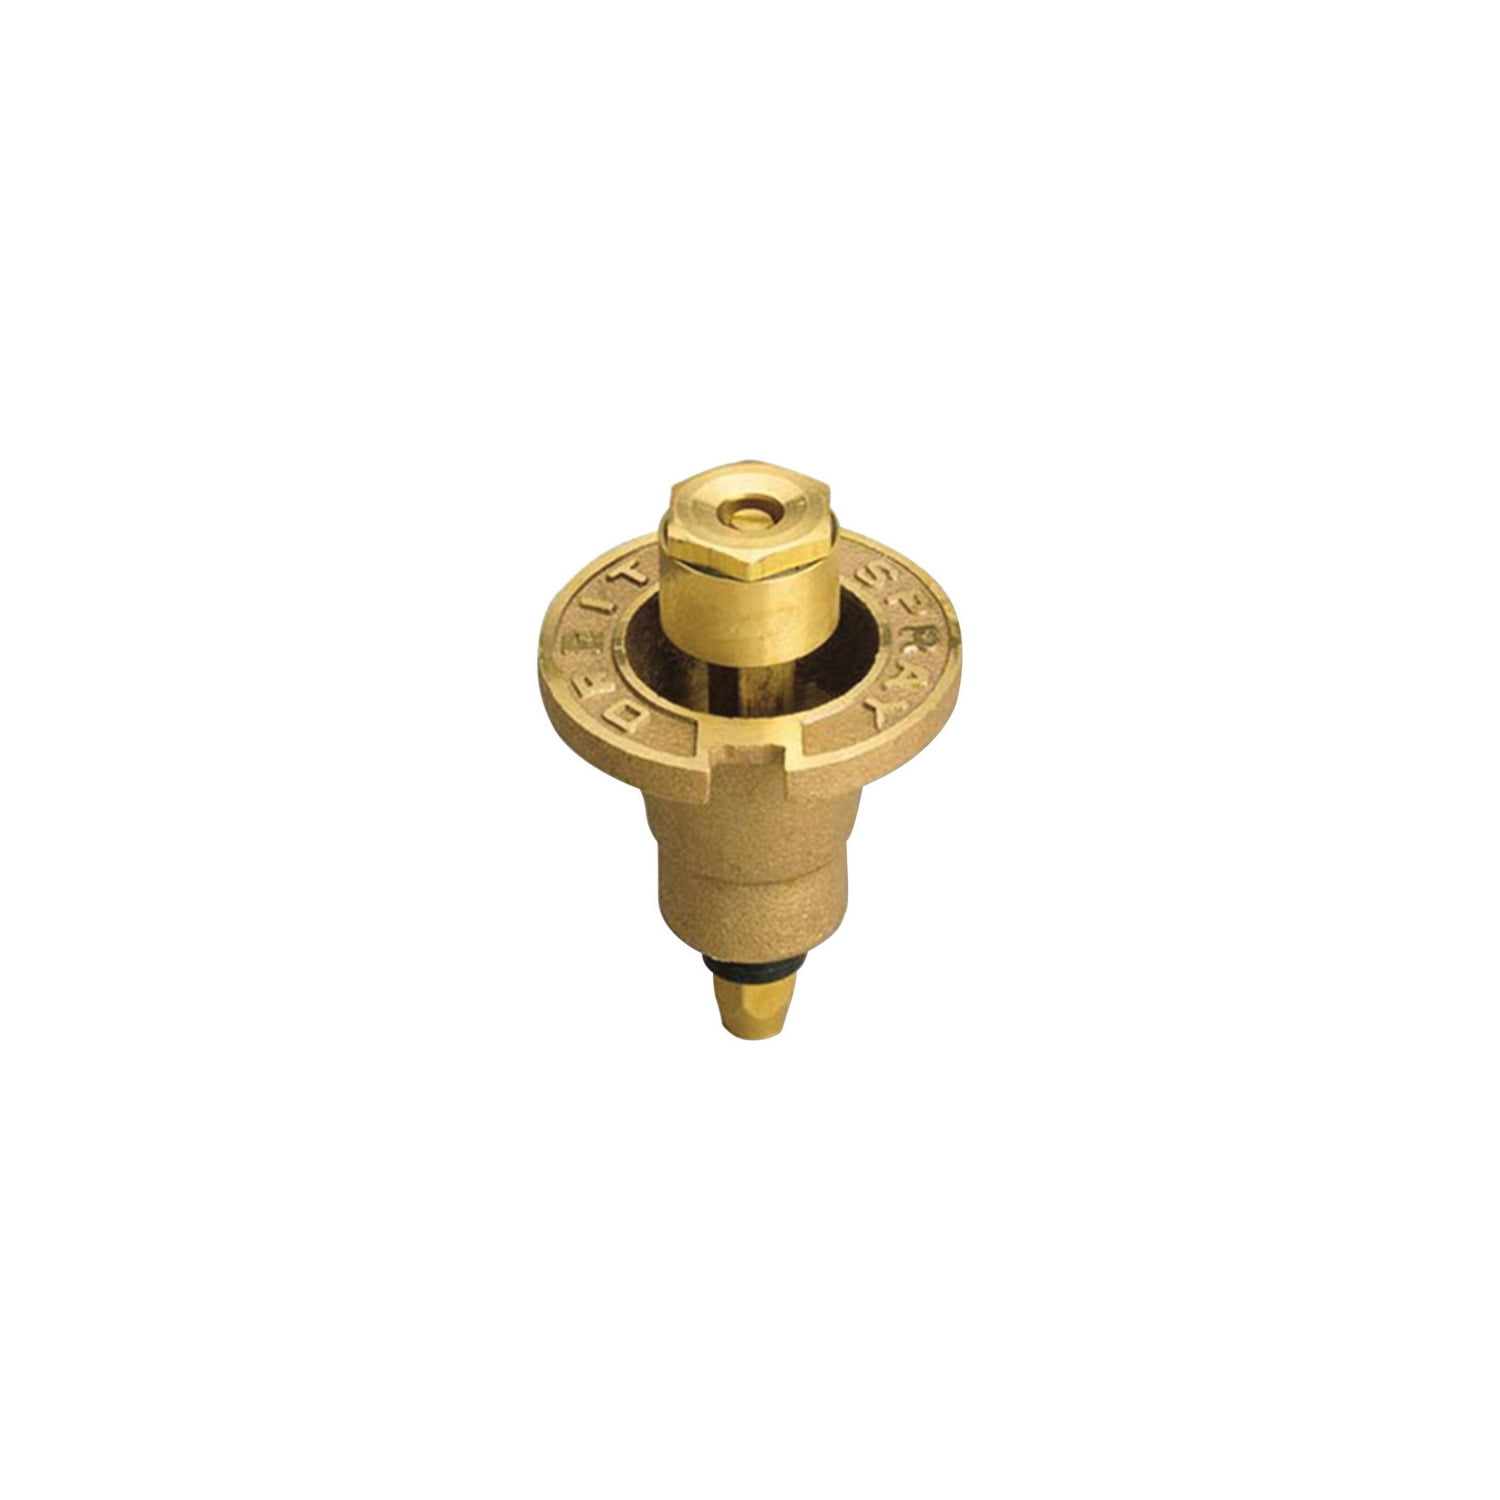 Orbit 54071 Sprinkler Head with Nozzle, 1/2 in Connection, FNPT, 15 ft,  Brass 